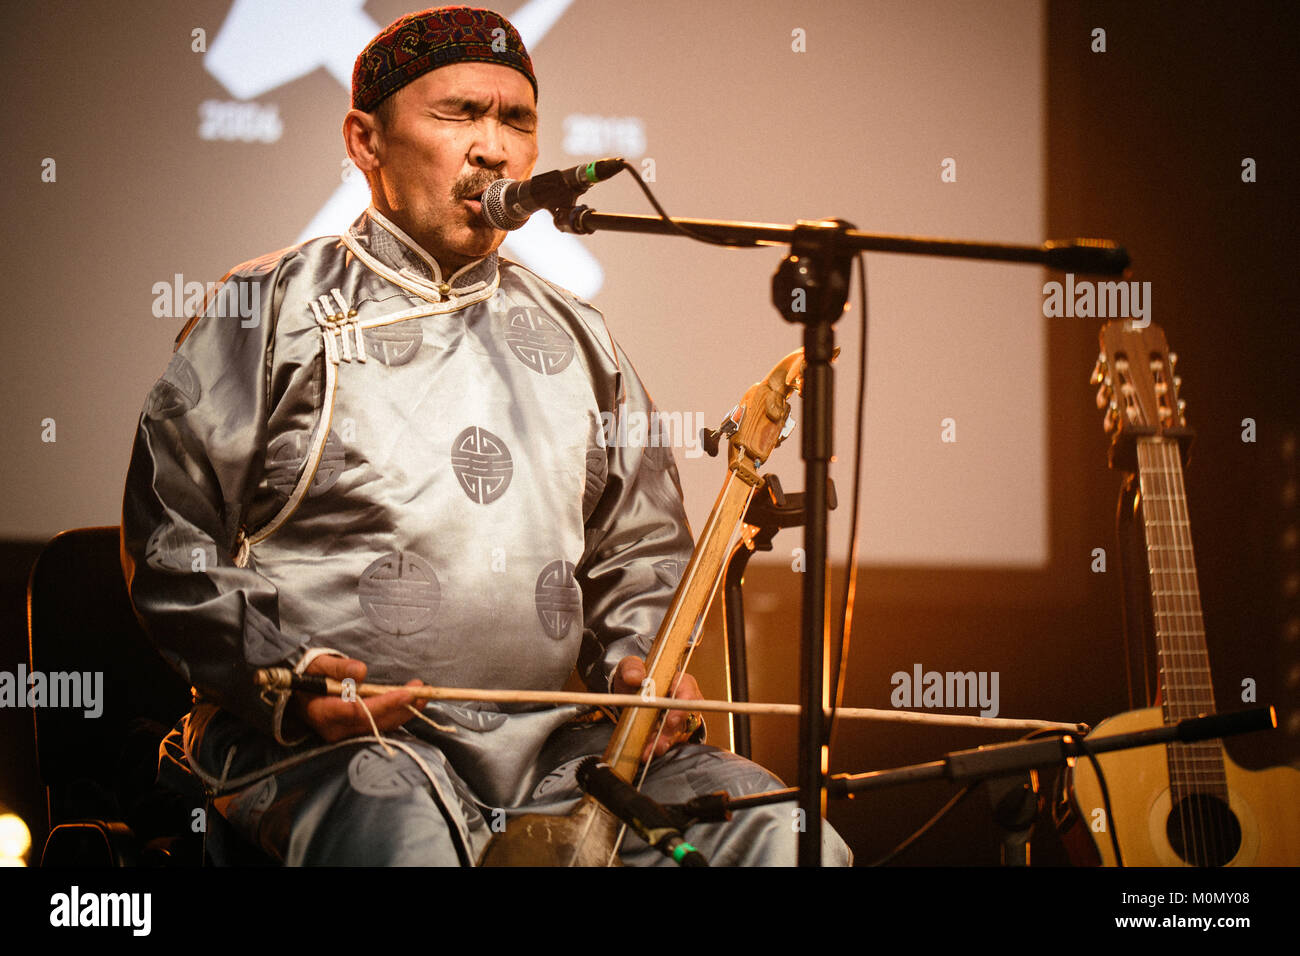 The Russian-Mongolian folk and throat singing band Huun-Huur-Tu performs a live concert at the Polish music festival Off Festival 2015 in Katowice. Here throat singer and musician Kaigal-ool Khovalyg on igil is pictured live on stage. Poland, 08/08 2015. Stock Photo